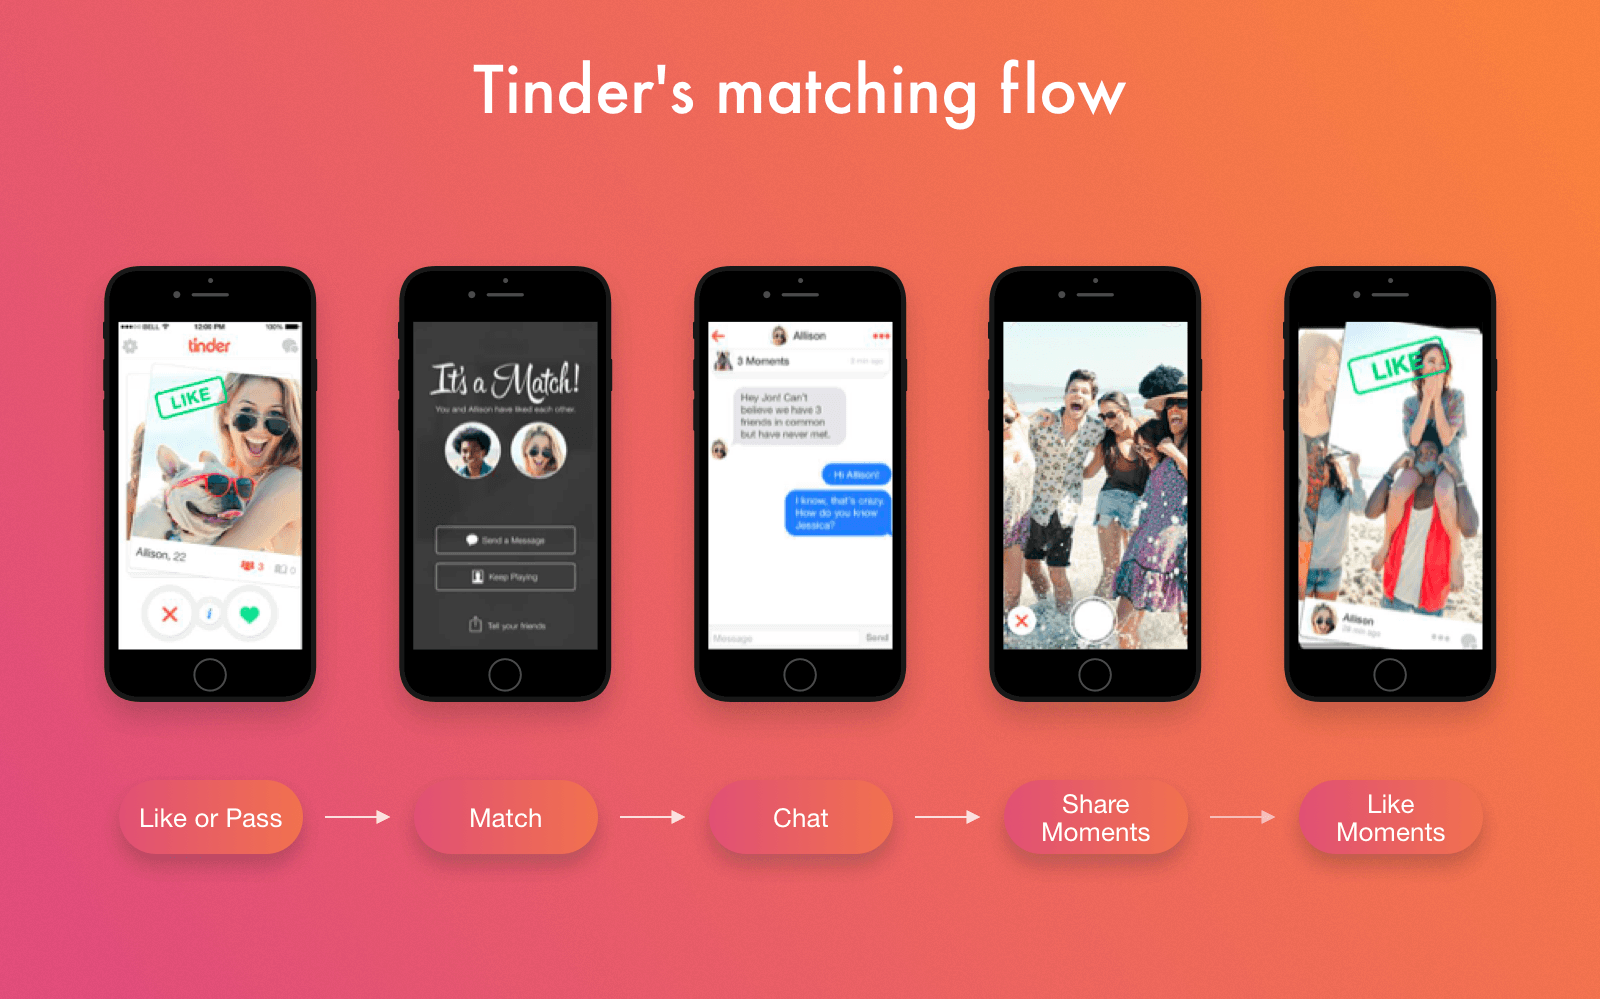 Make An Account To Swipe On Tinder Dating Apps